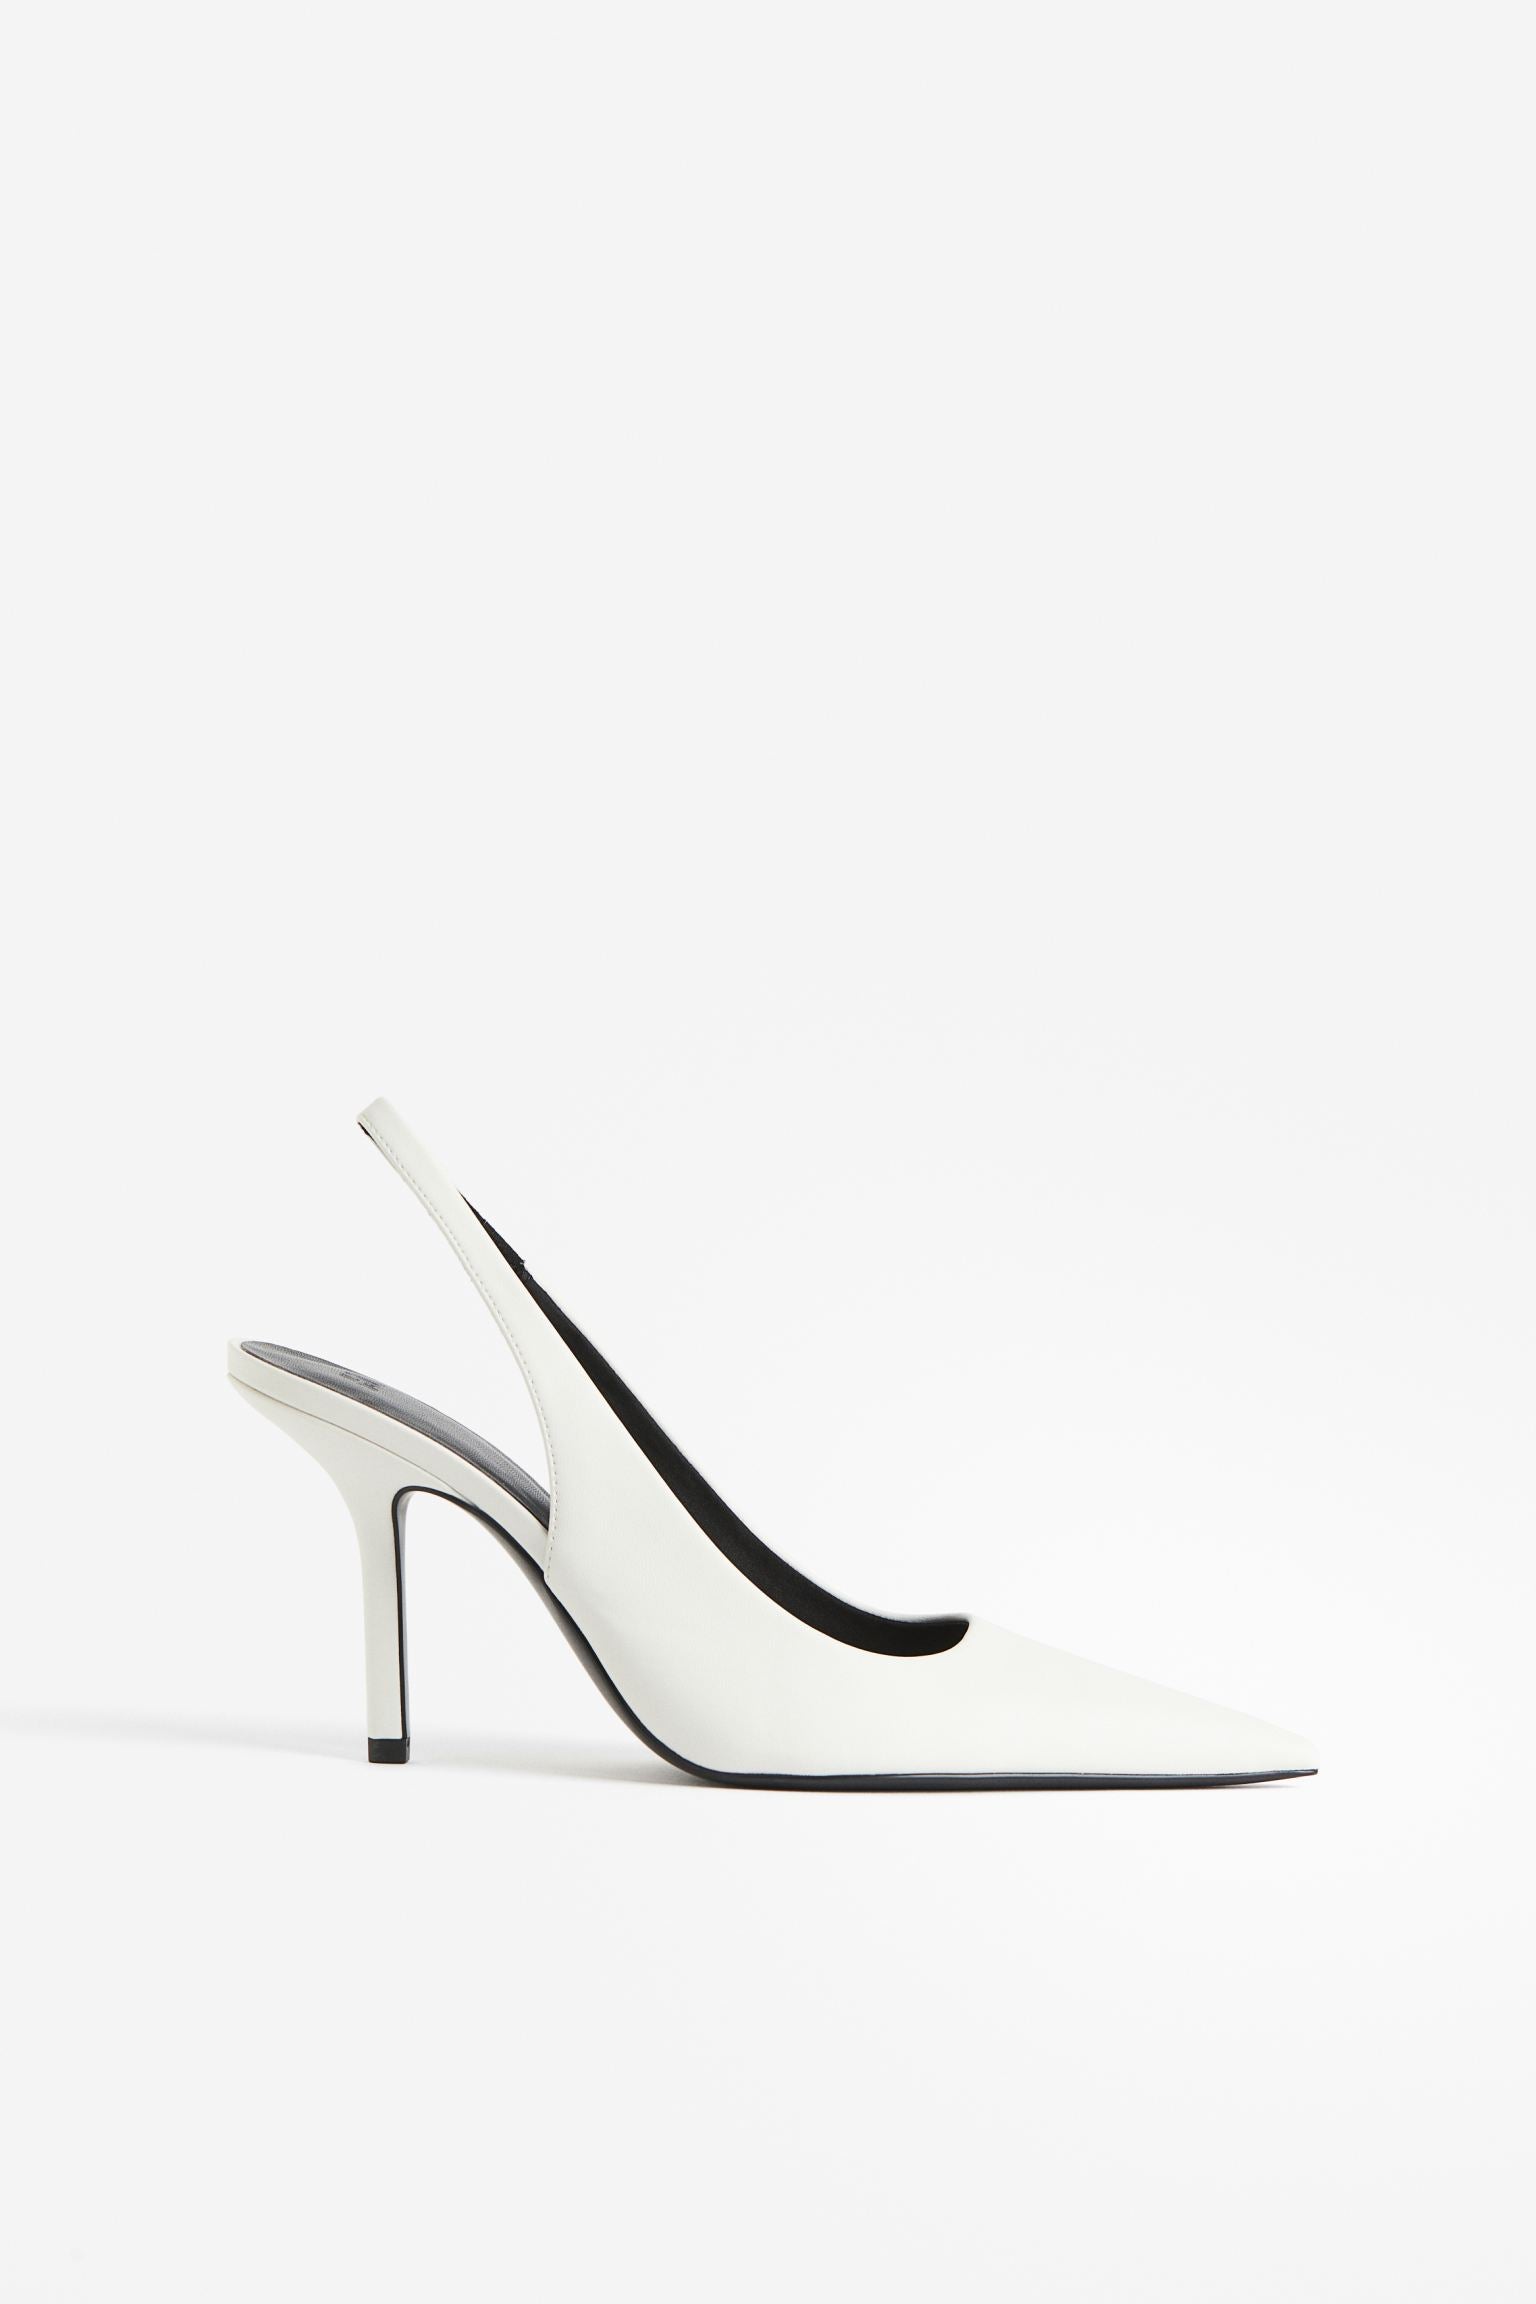 H & M POINTED TOE SLINGBACK HEELS IN WHITE